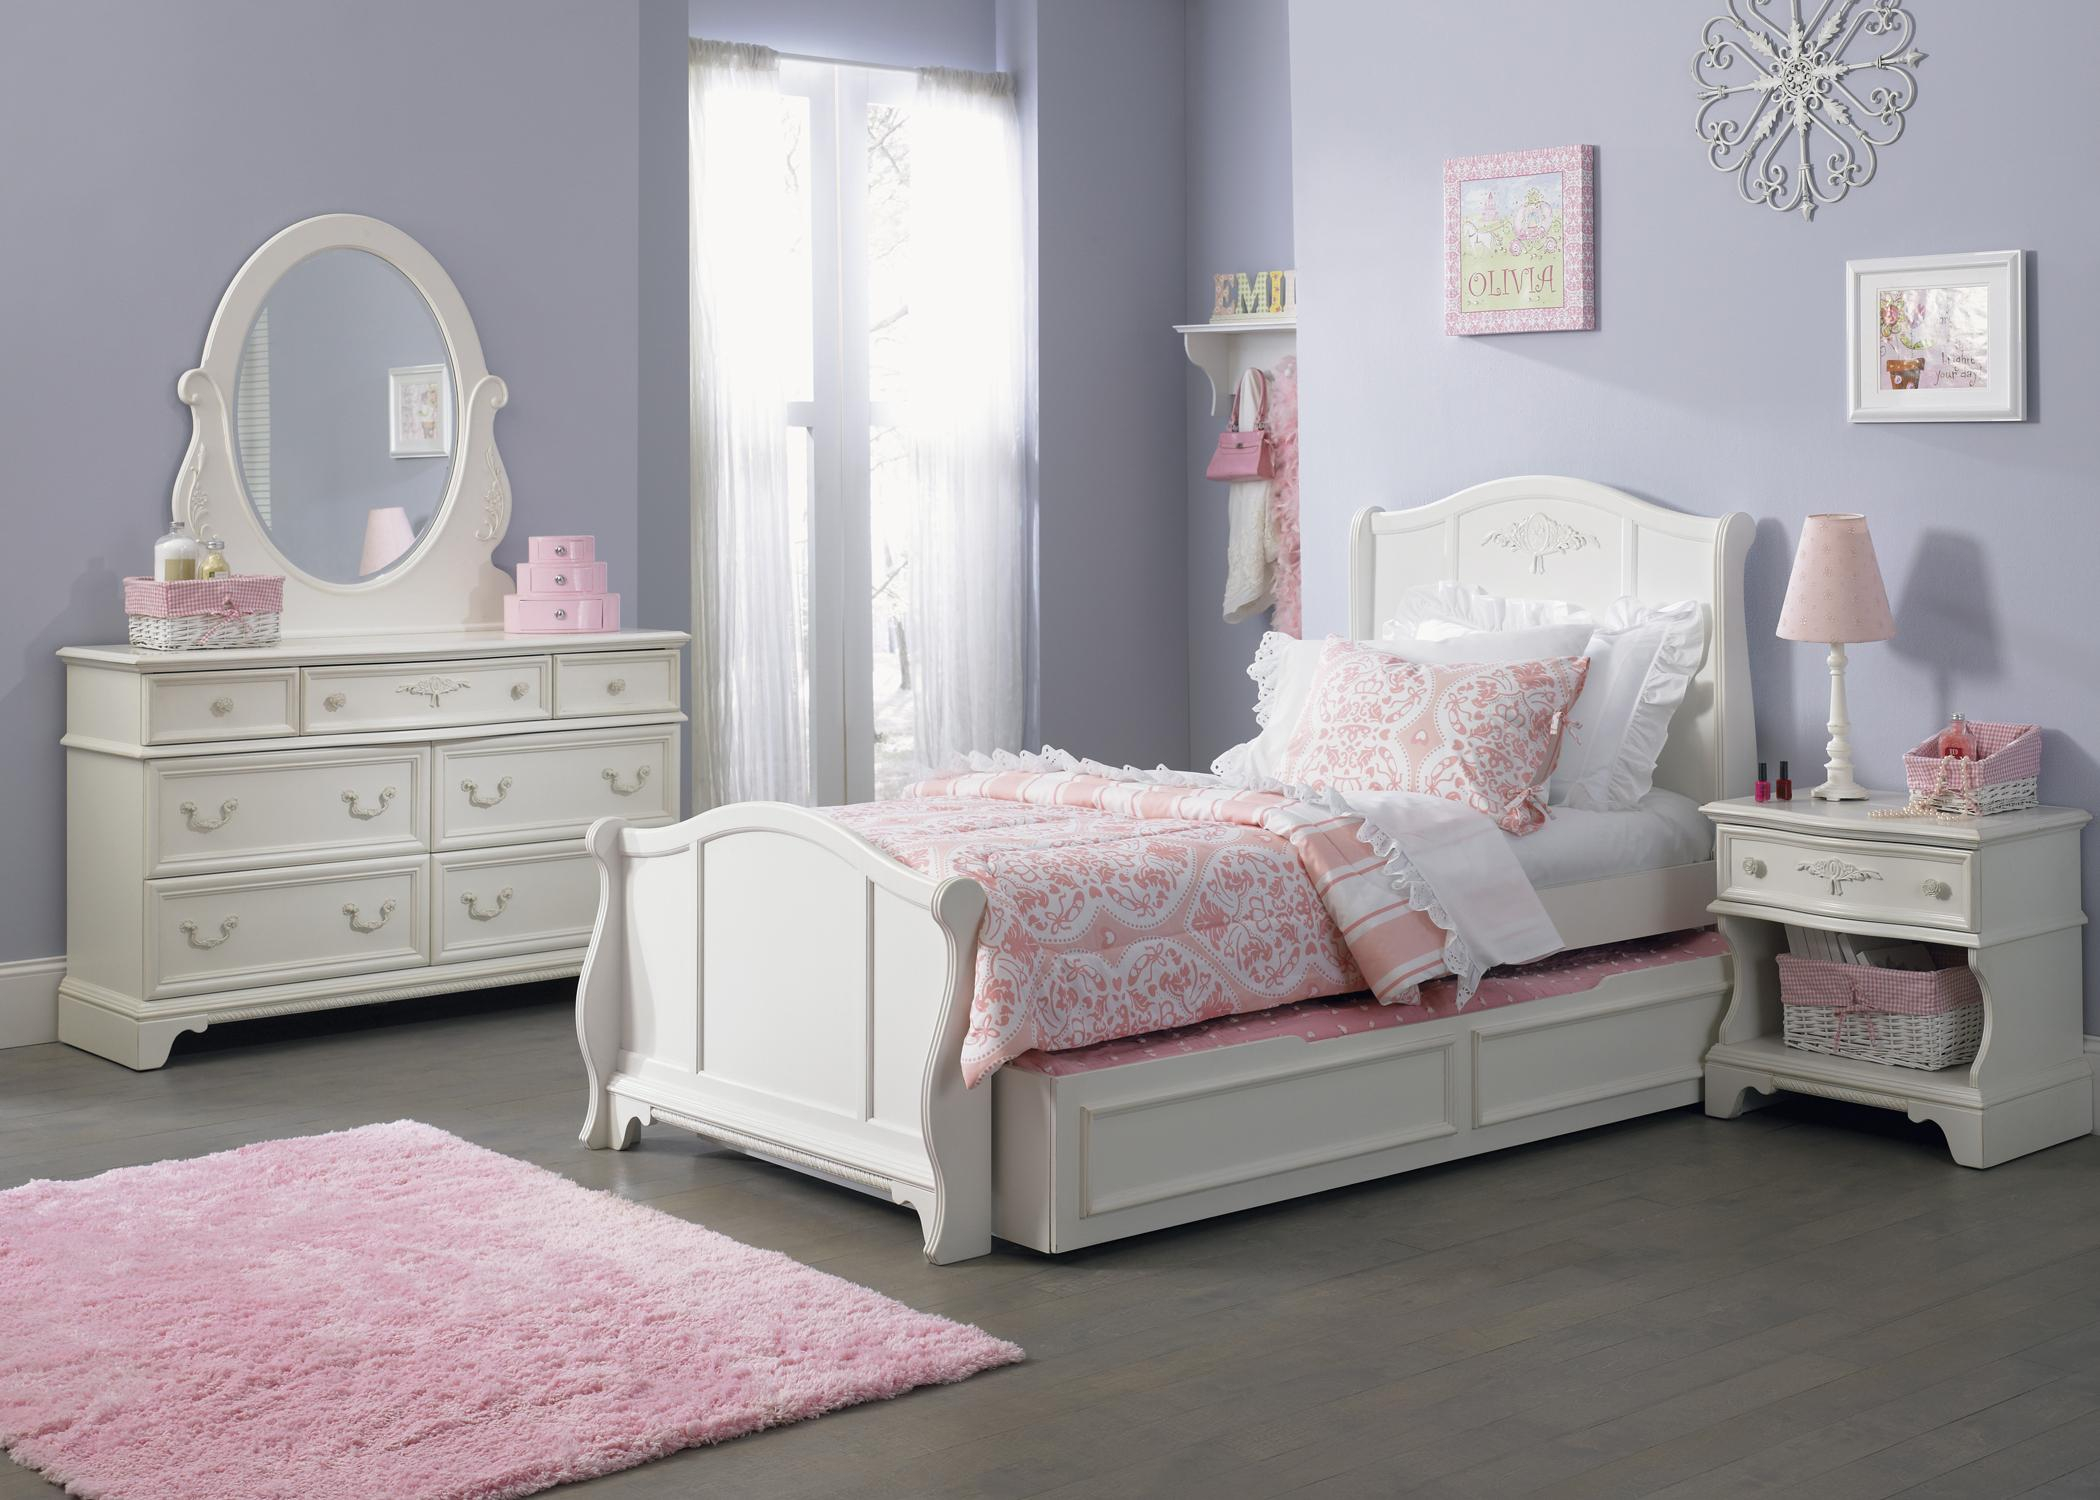 Magnificent Argos Childrens White Bedroom Furniture Charming Queen inside measurements 2100 X 1500